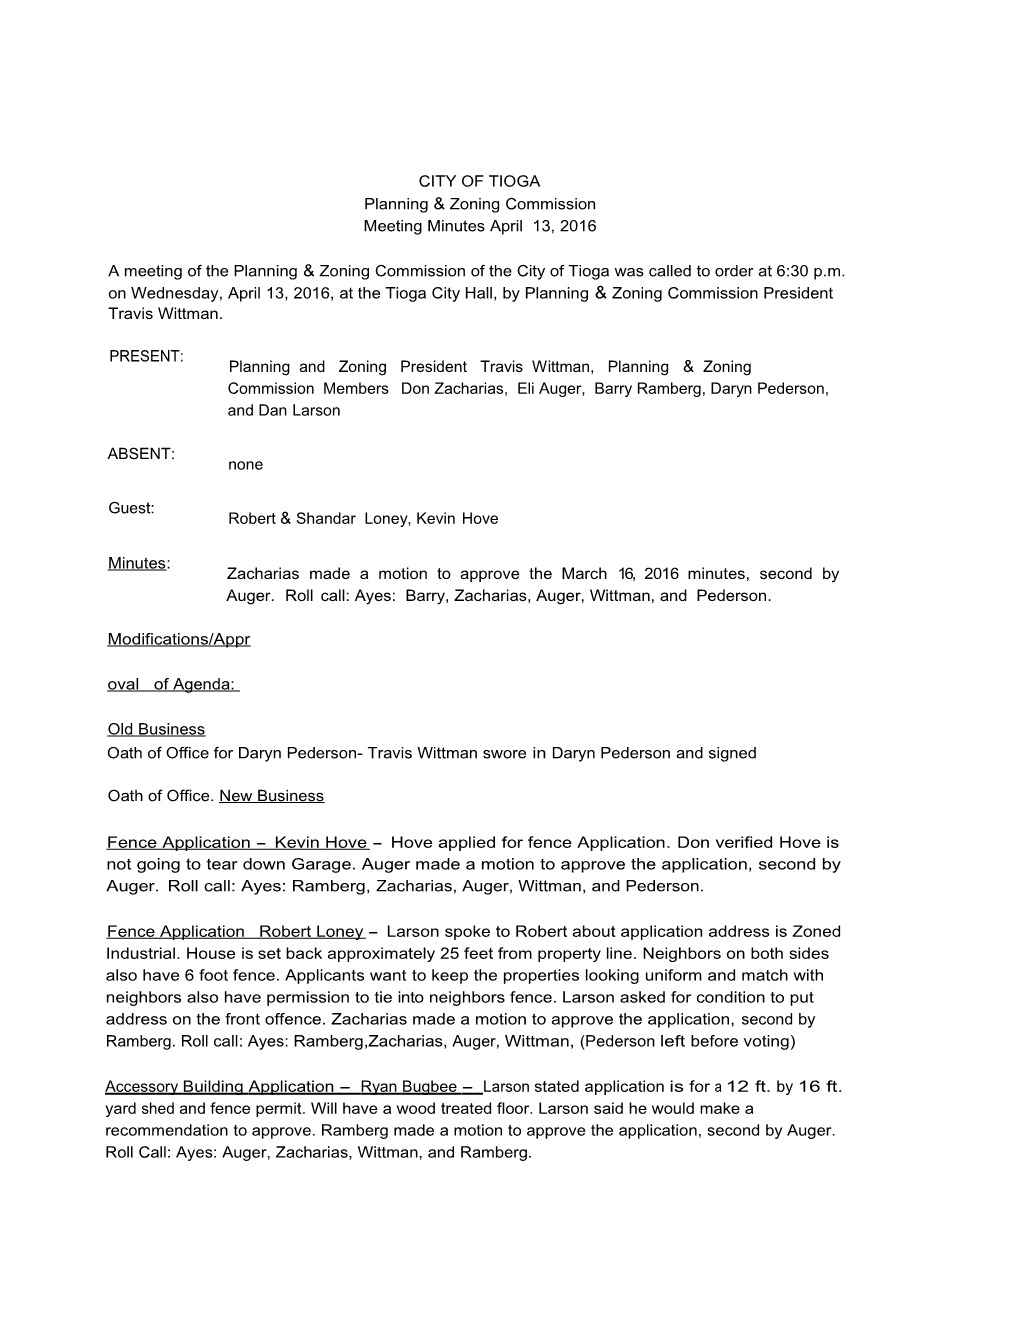 Planning Zoning Commission Meeting Minutes April 13, 2016